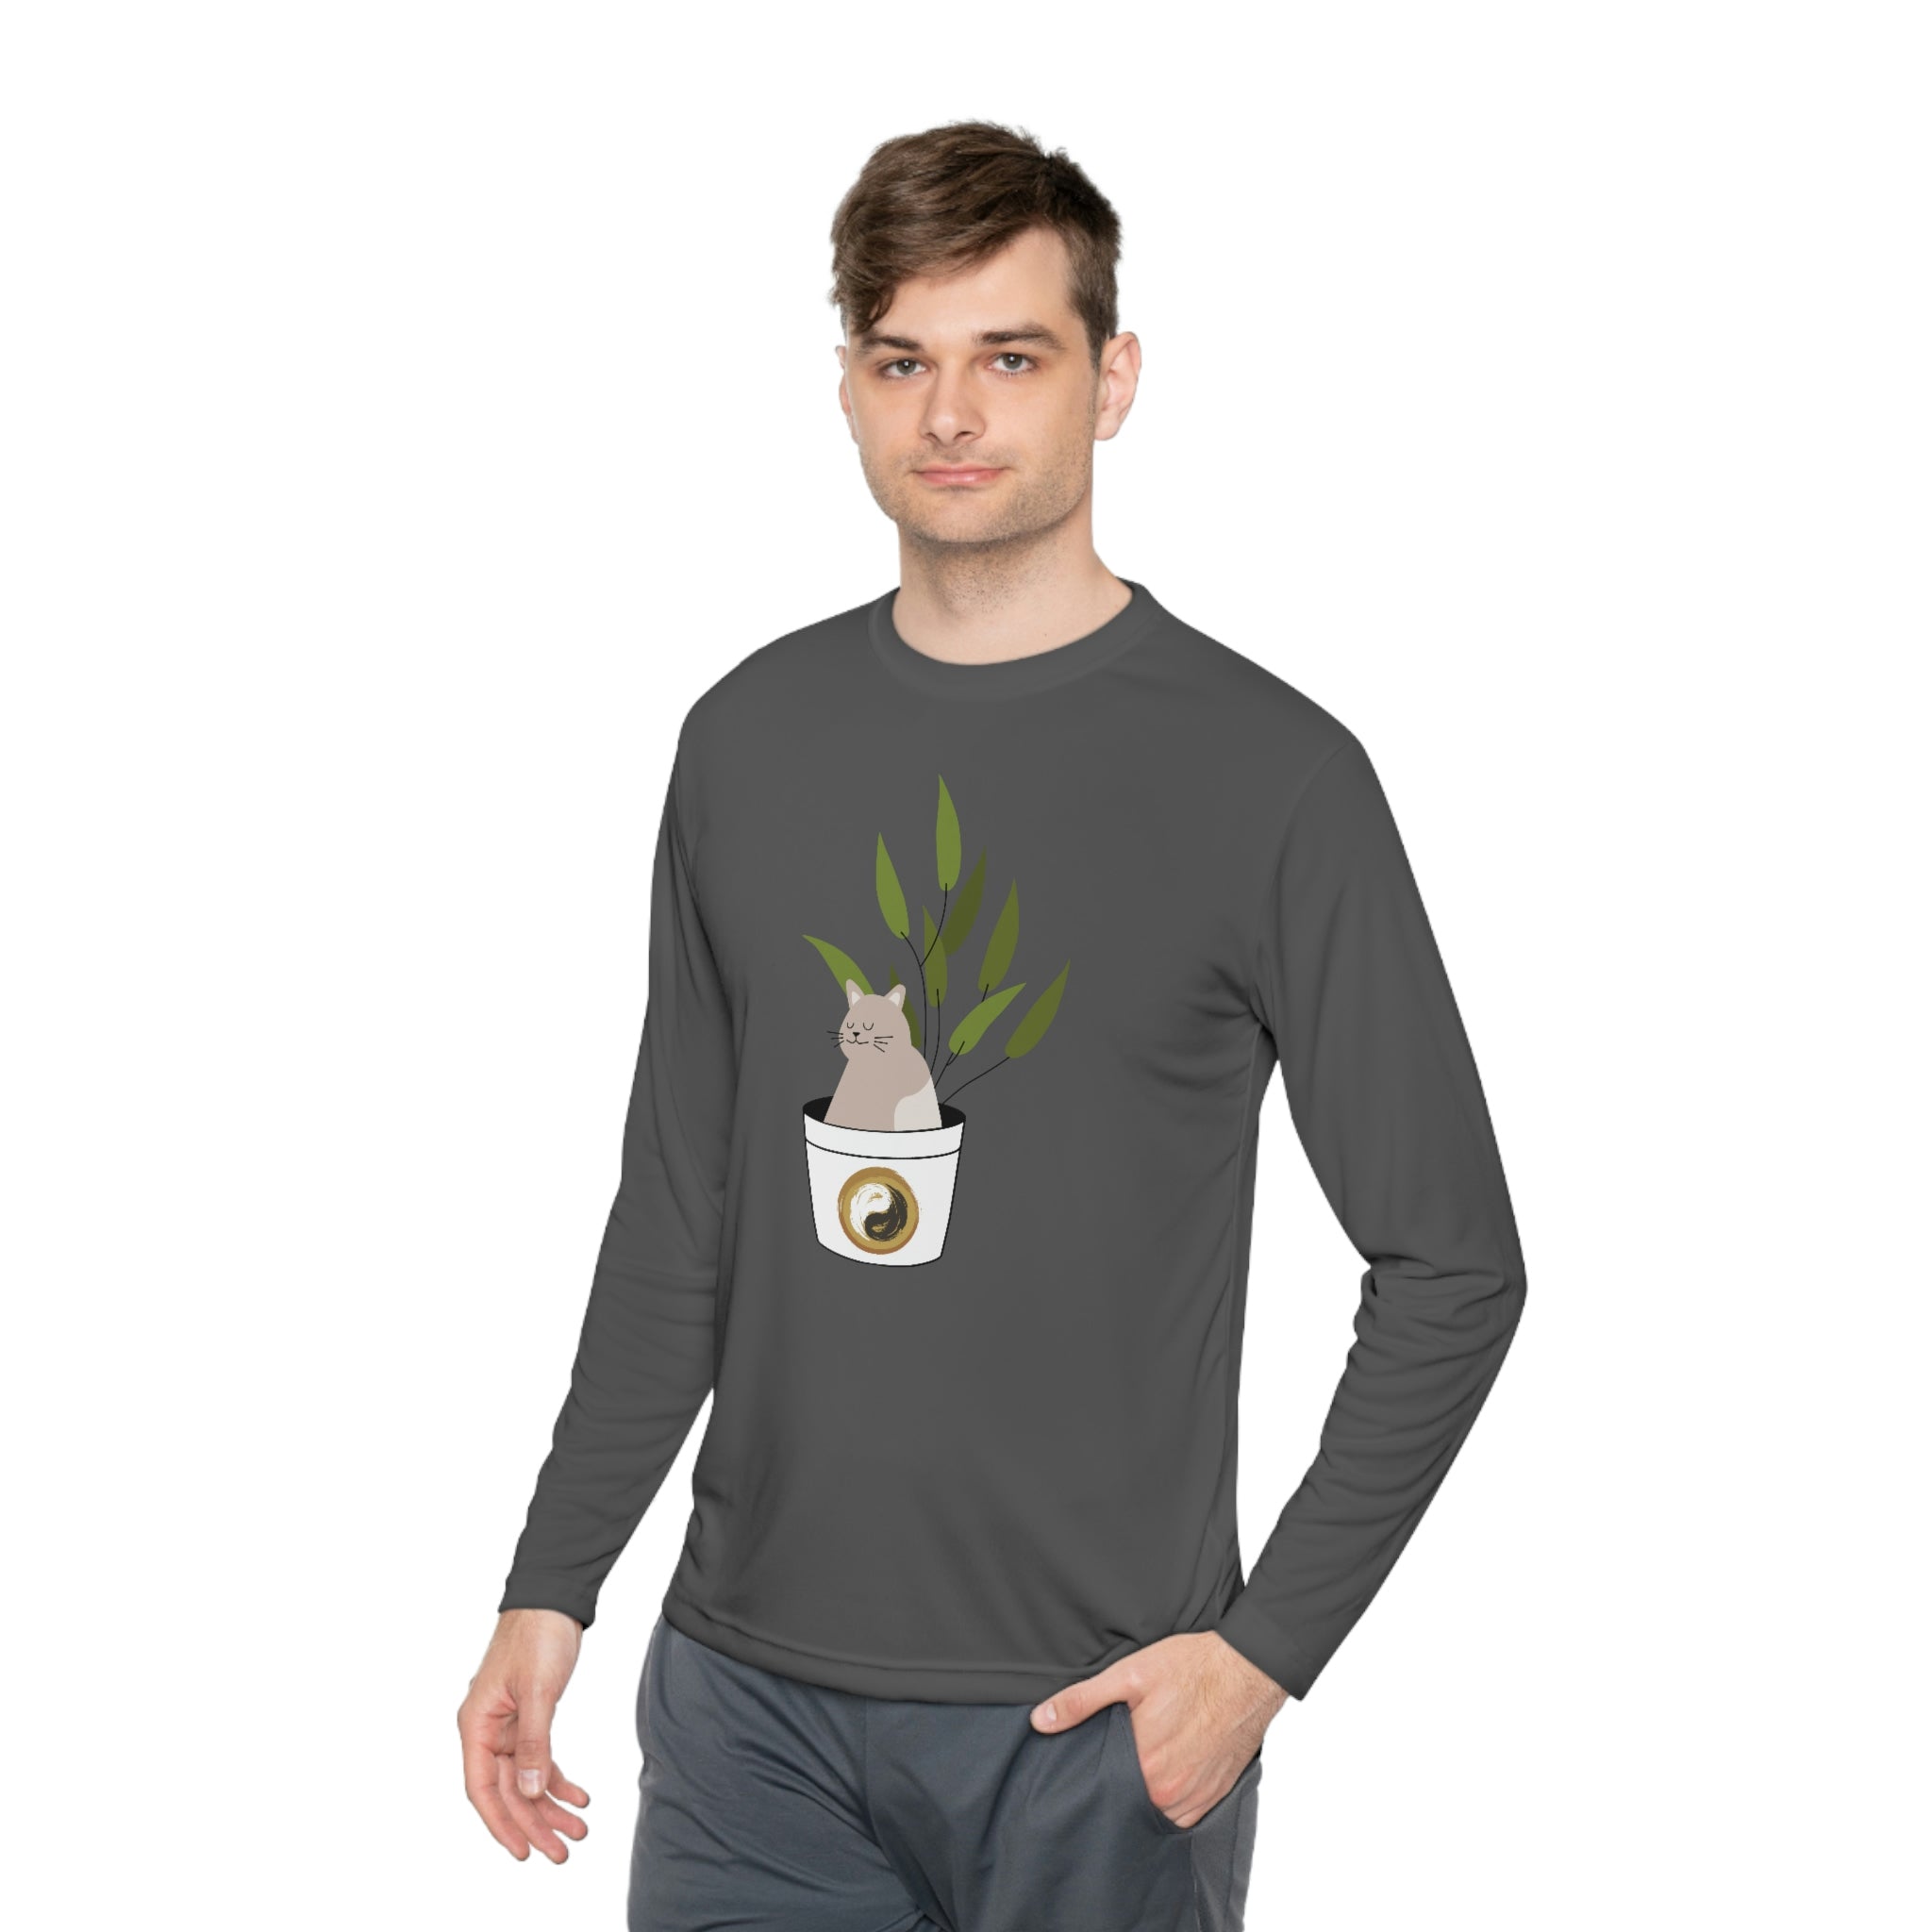 Unisex Lightweight Long Sleeve Yoga and Pilates Tee - Cute Cat - Personal Hour for Yoga and Meditations 